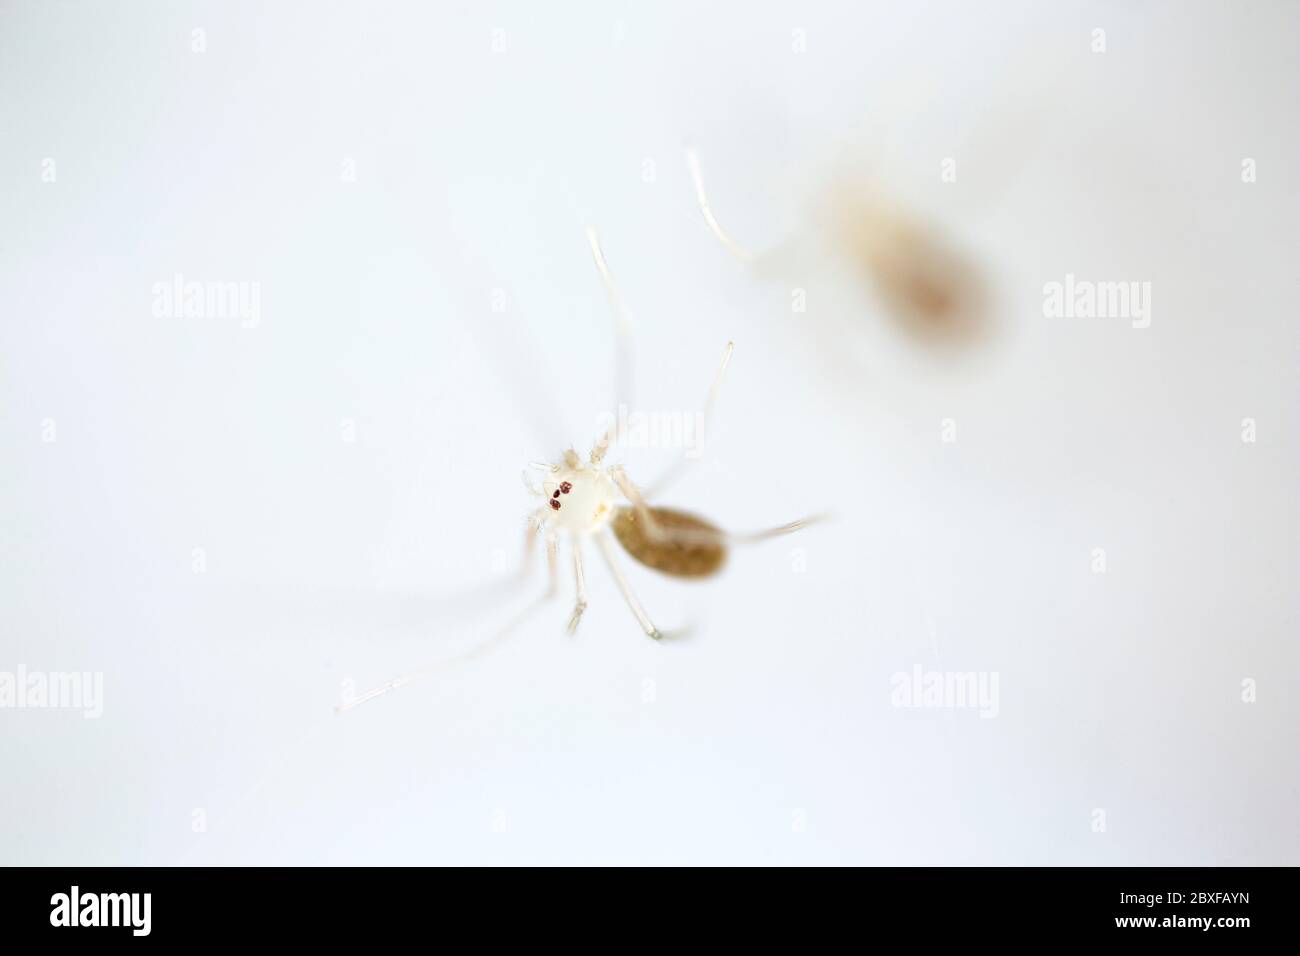 Newly emerged Daddy long-legs spiders, Pholcus phalangioides, in a home. North Dorset England UK GB Stock Photo